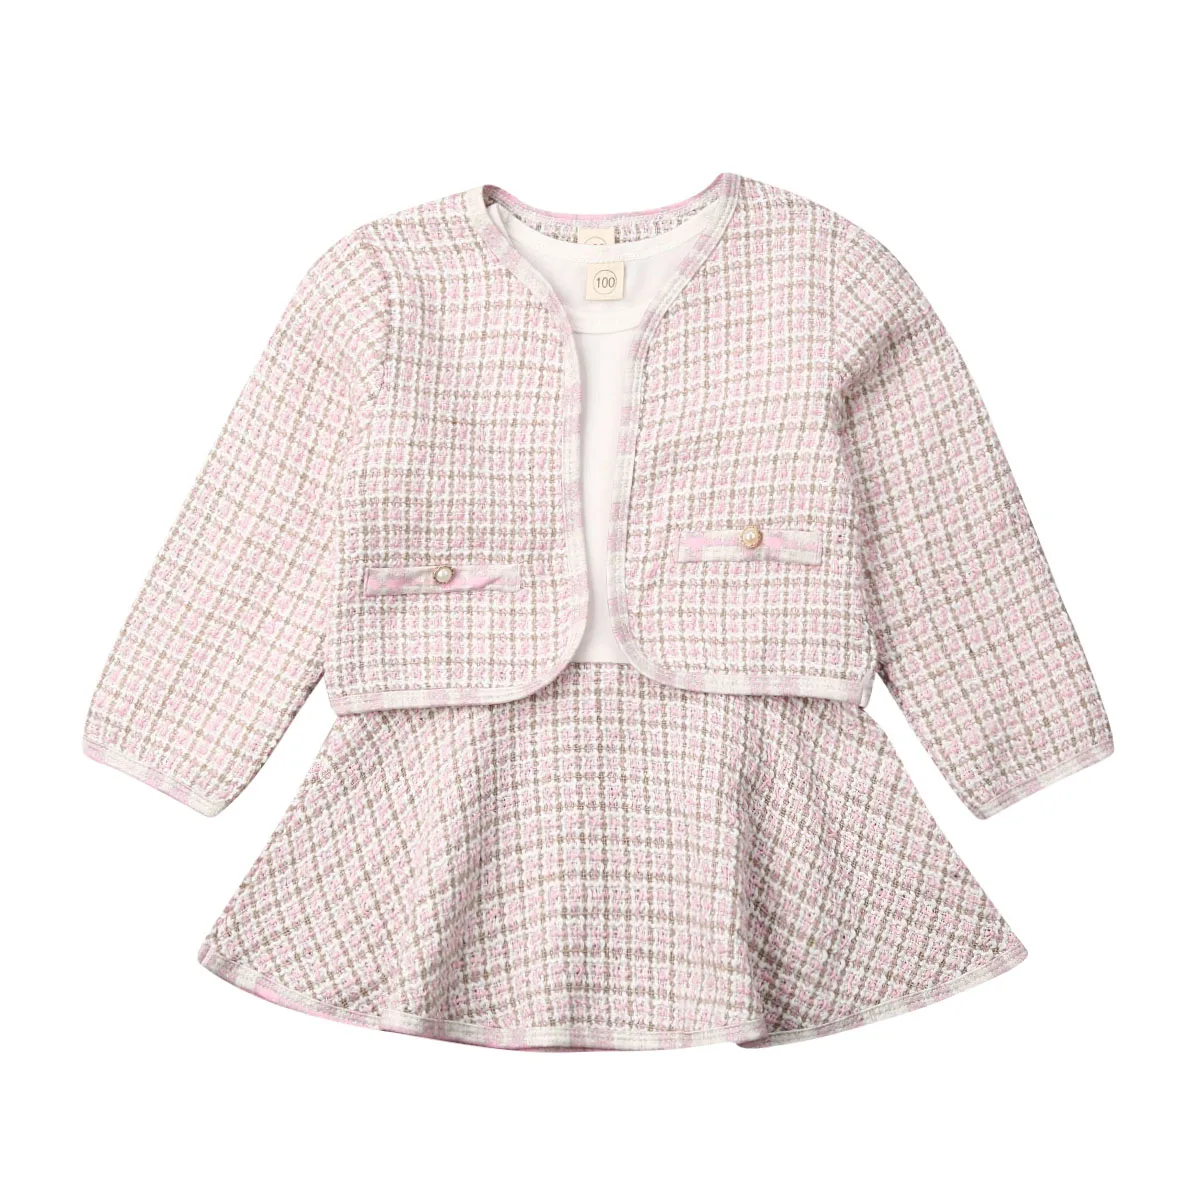 2PCS Autumn Winter Spring Party Baby Girls Clothes Plaid Coat Tops+Tutu Dress Formal Outfits Fit For 0-6 Years images - 6